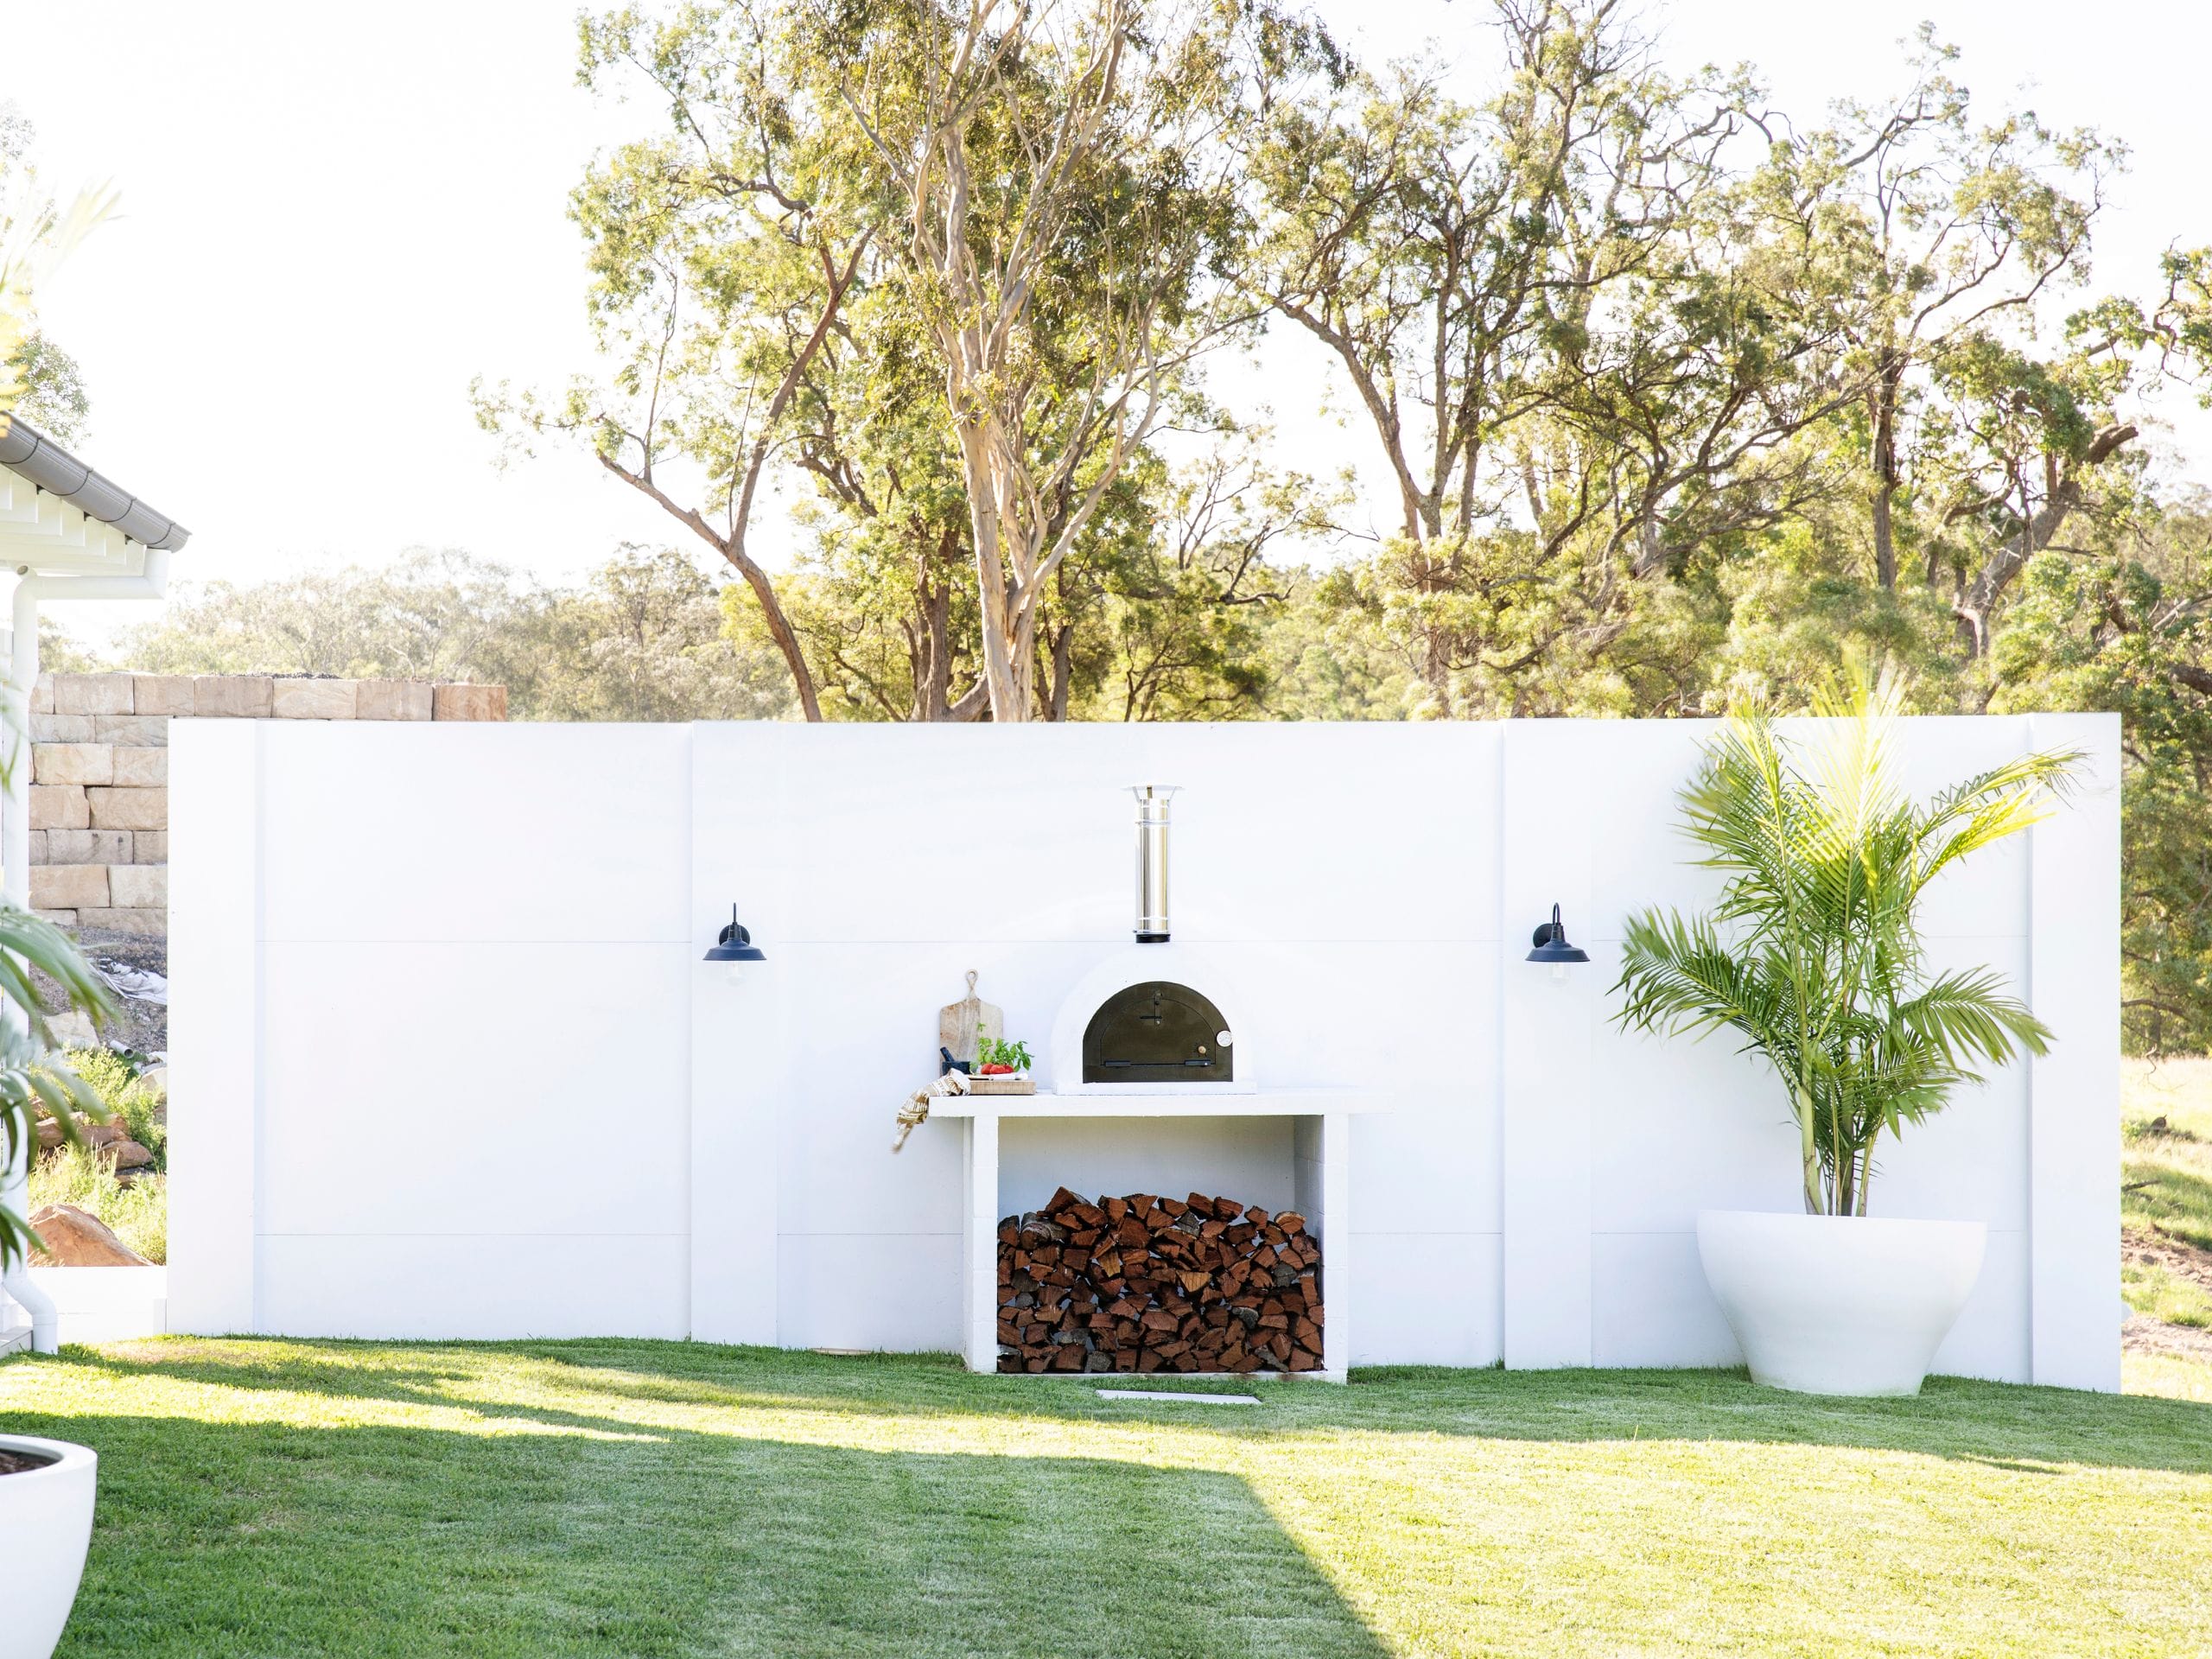 No matter your brief, a backyard remodel will immediately rejuvenate your outdoor space